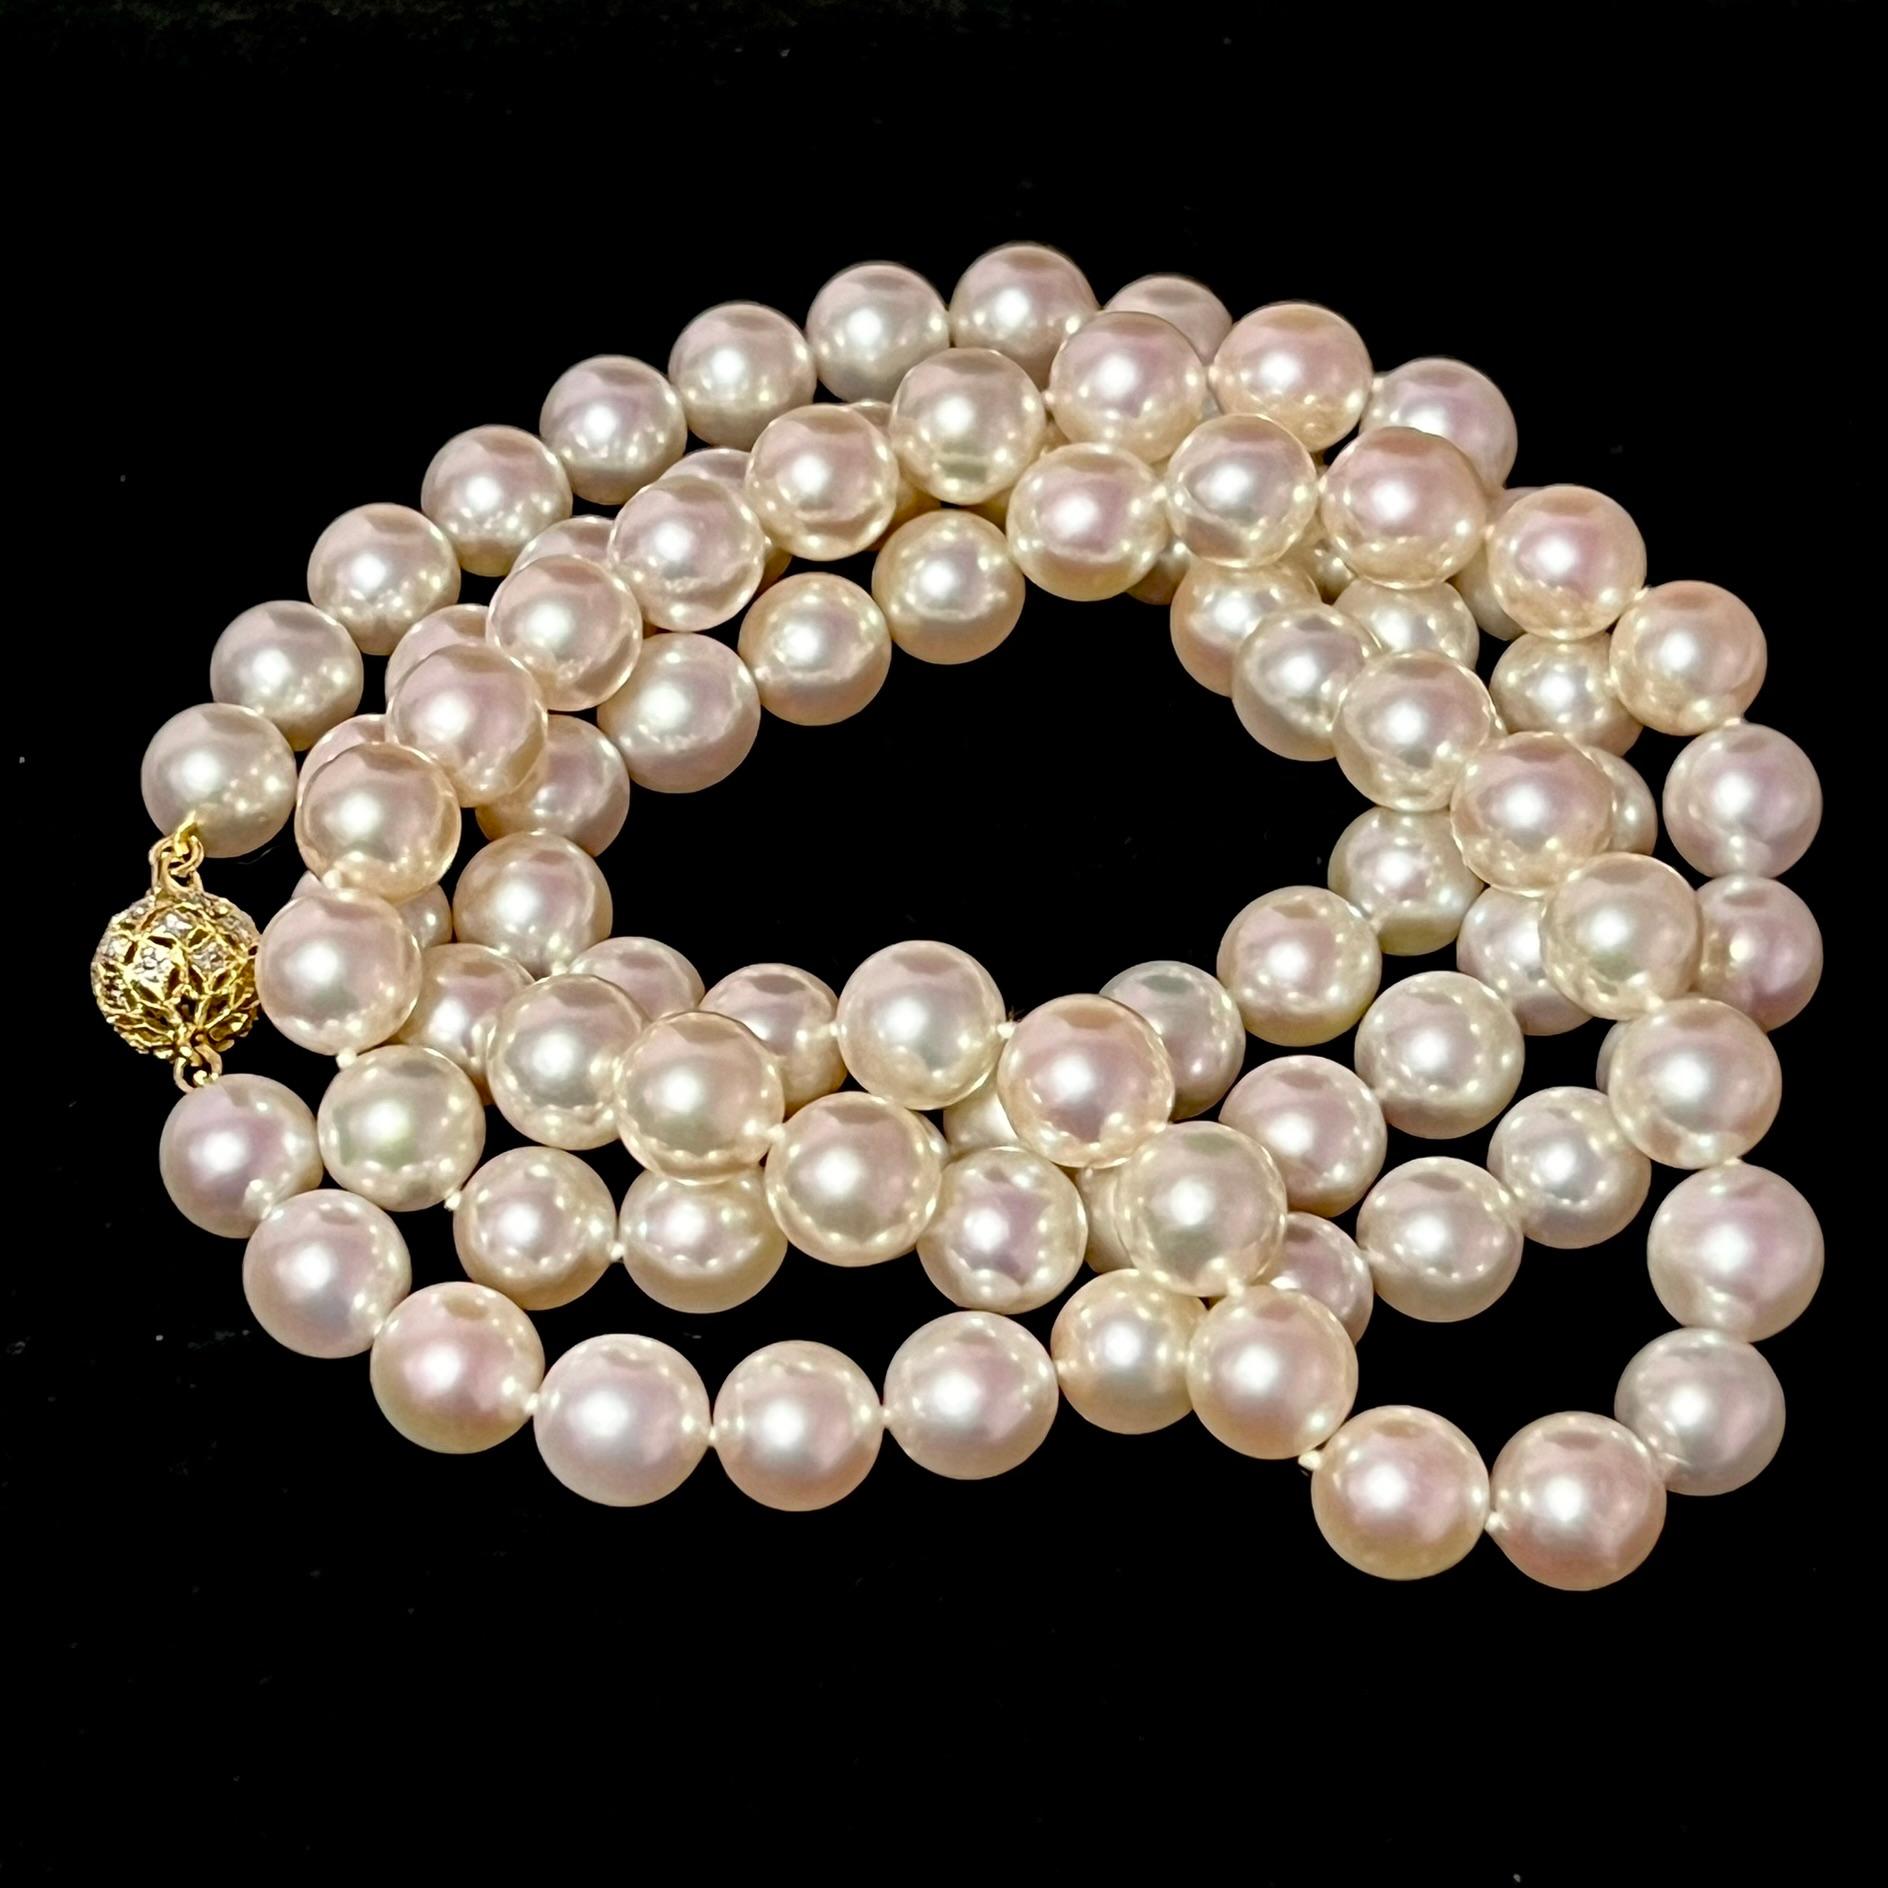 Natural Fine Quality Japanese Saltwater Akoya Pearl Diamond Necklace 35